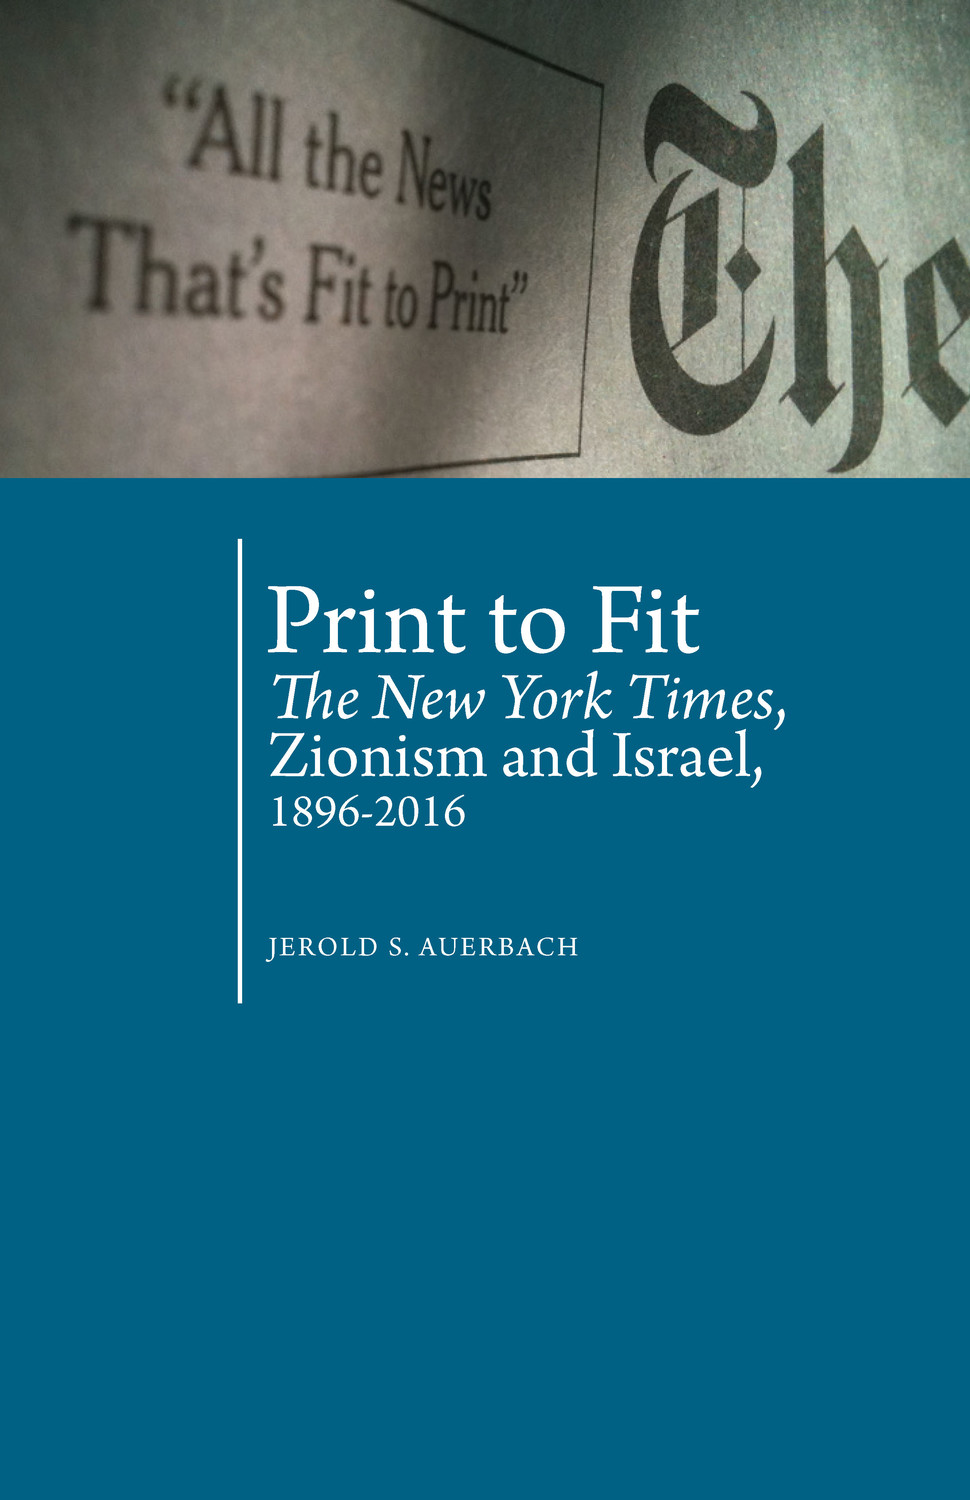 Print to Fit: The York Times, Zionism and Israel (1896-2016) — Academic Studies